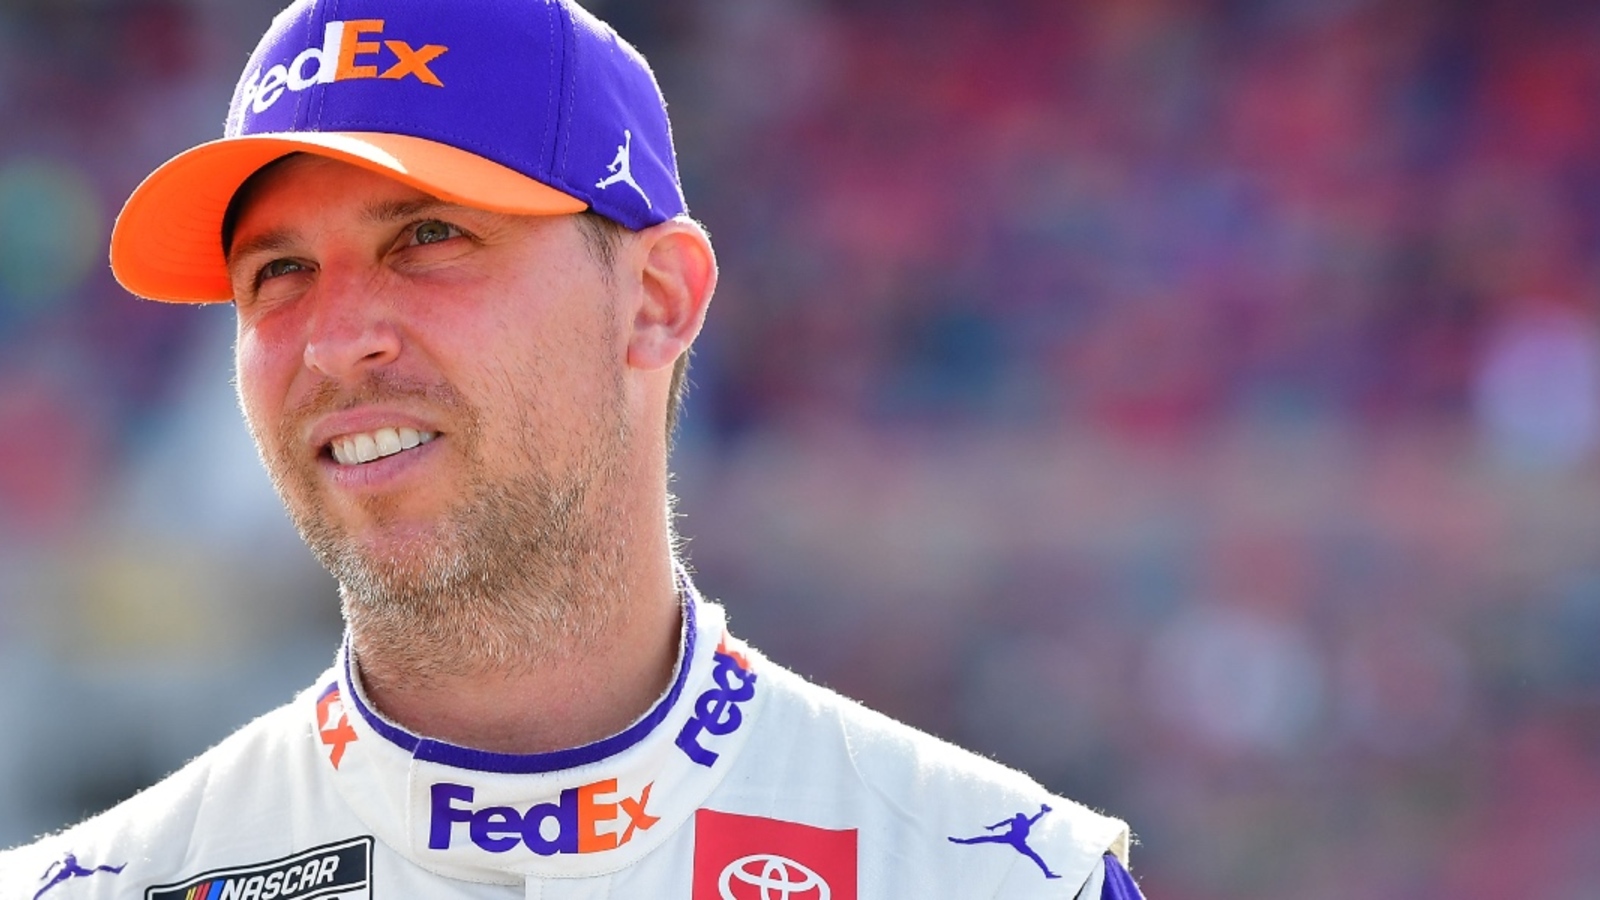 Denny Hamlin: Questionable caution for Kyle Busch incident changed strategy for several teams